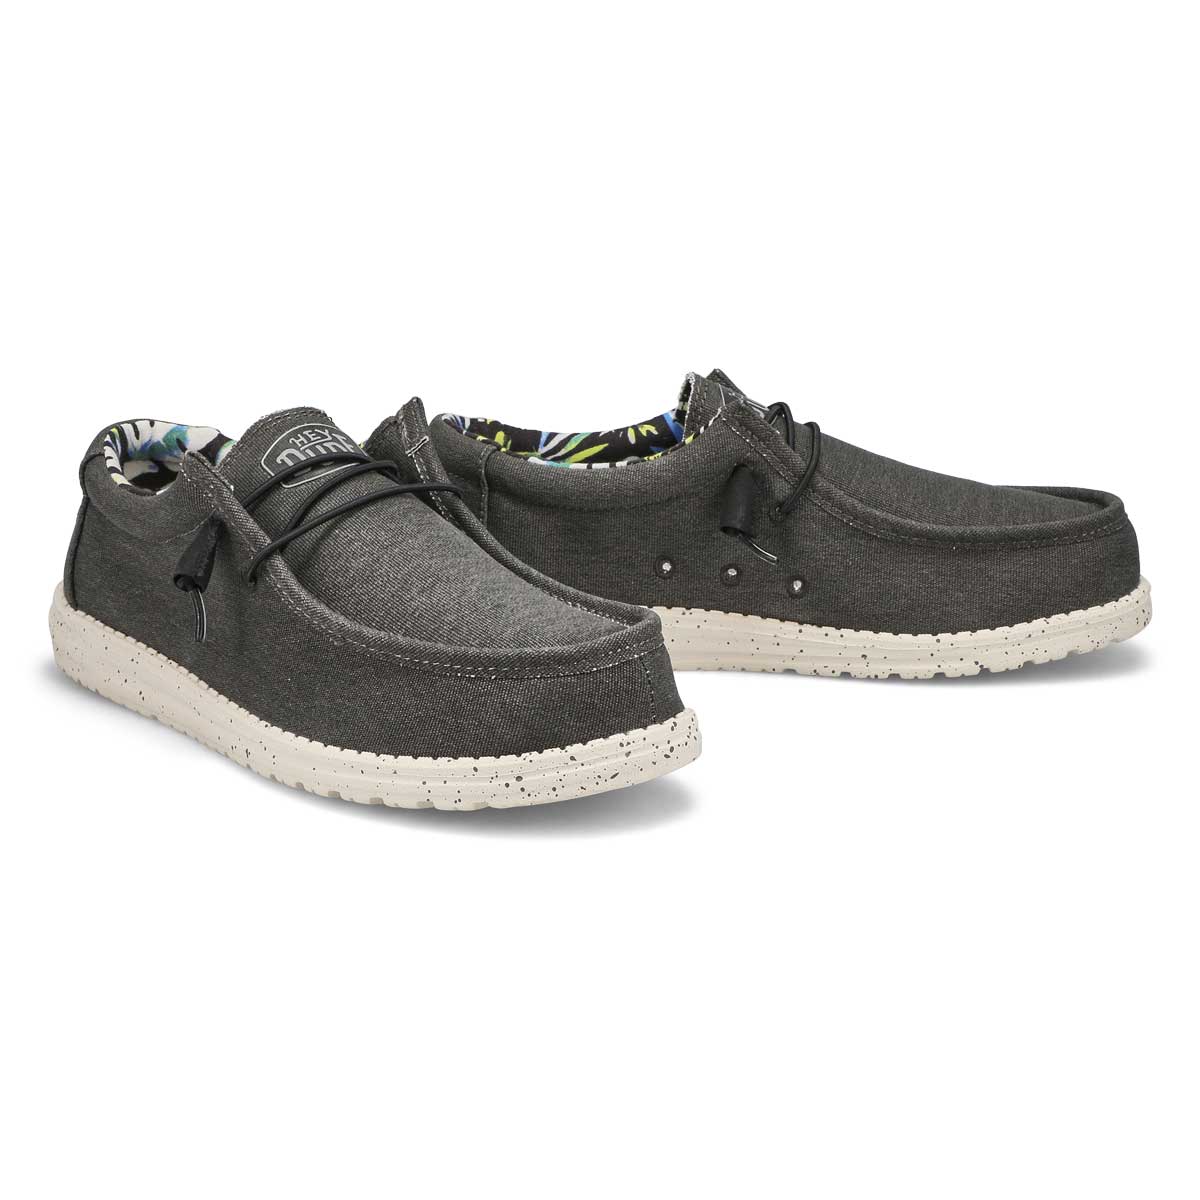 Wally Stretch Black - Men's Casual Shoes